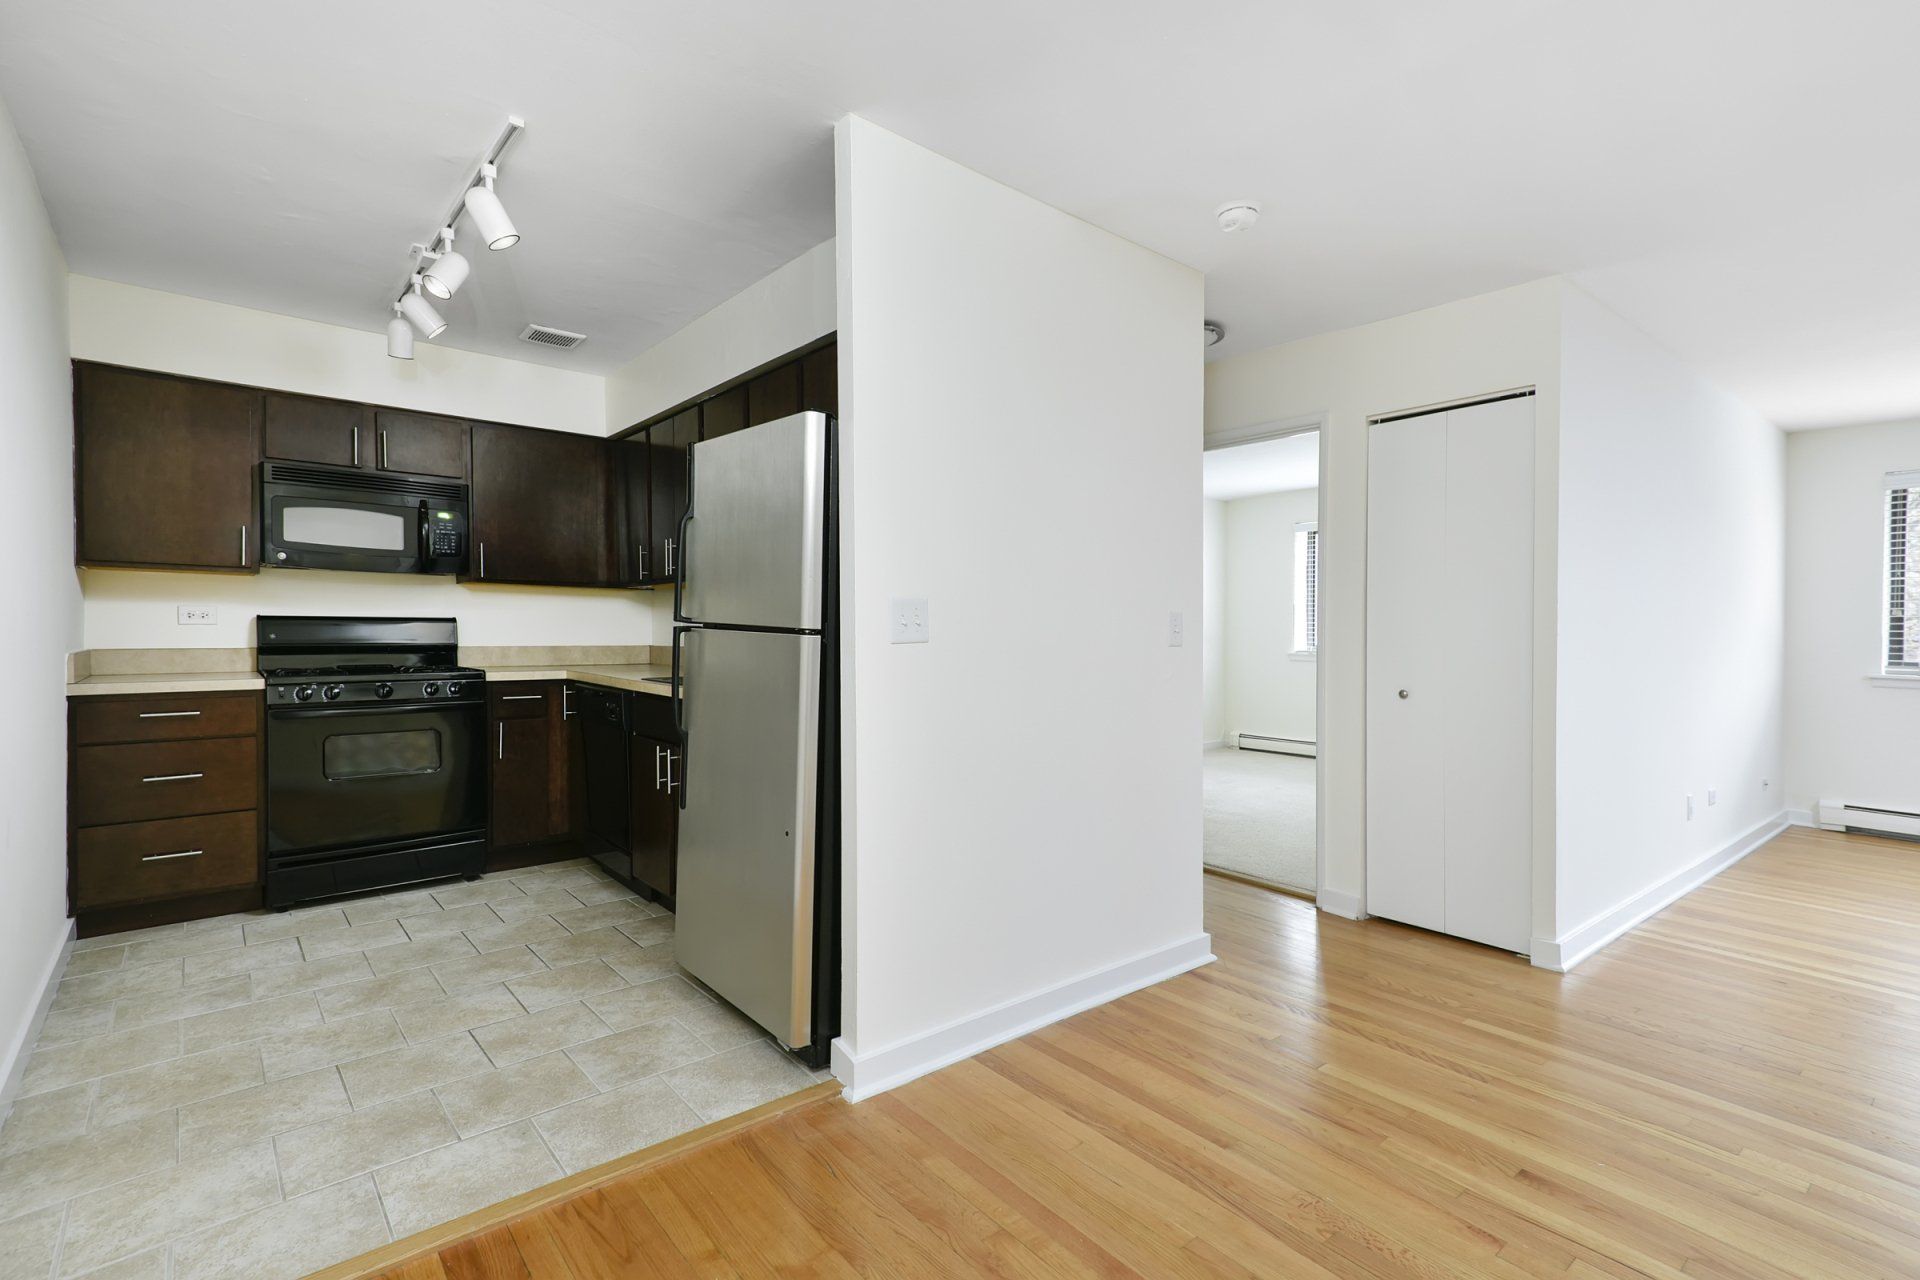 Empty apartment floor plan with kitchen view at Reside on Stratford.